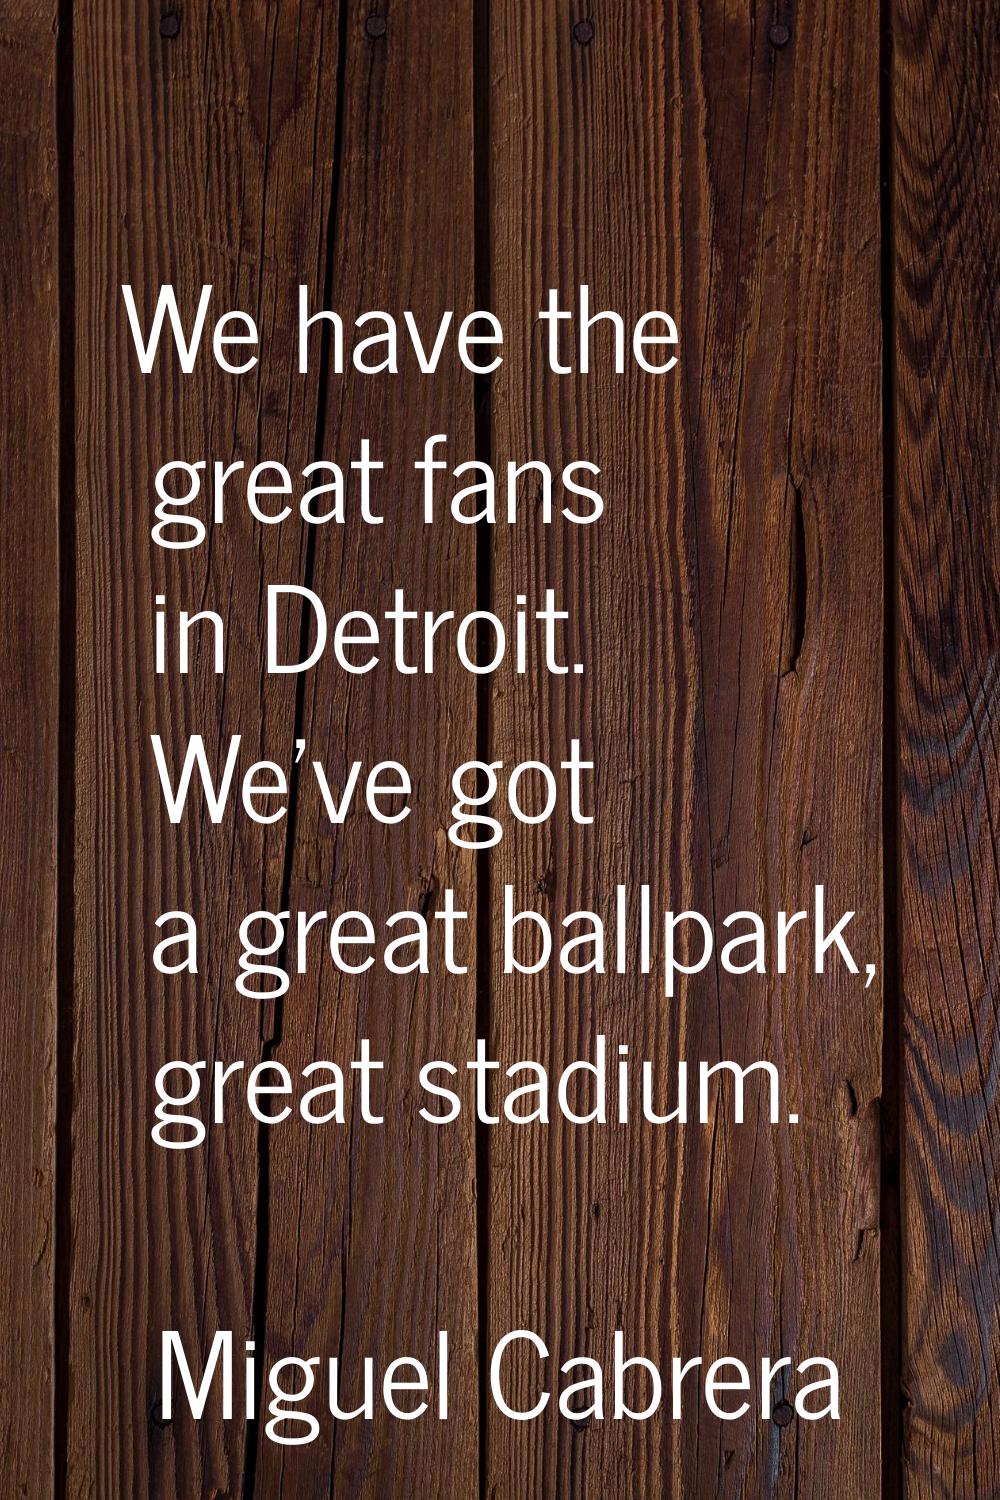 We have the great fans in Detroit. We've got a great ballpark, great stadium.